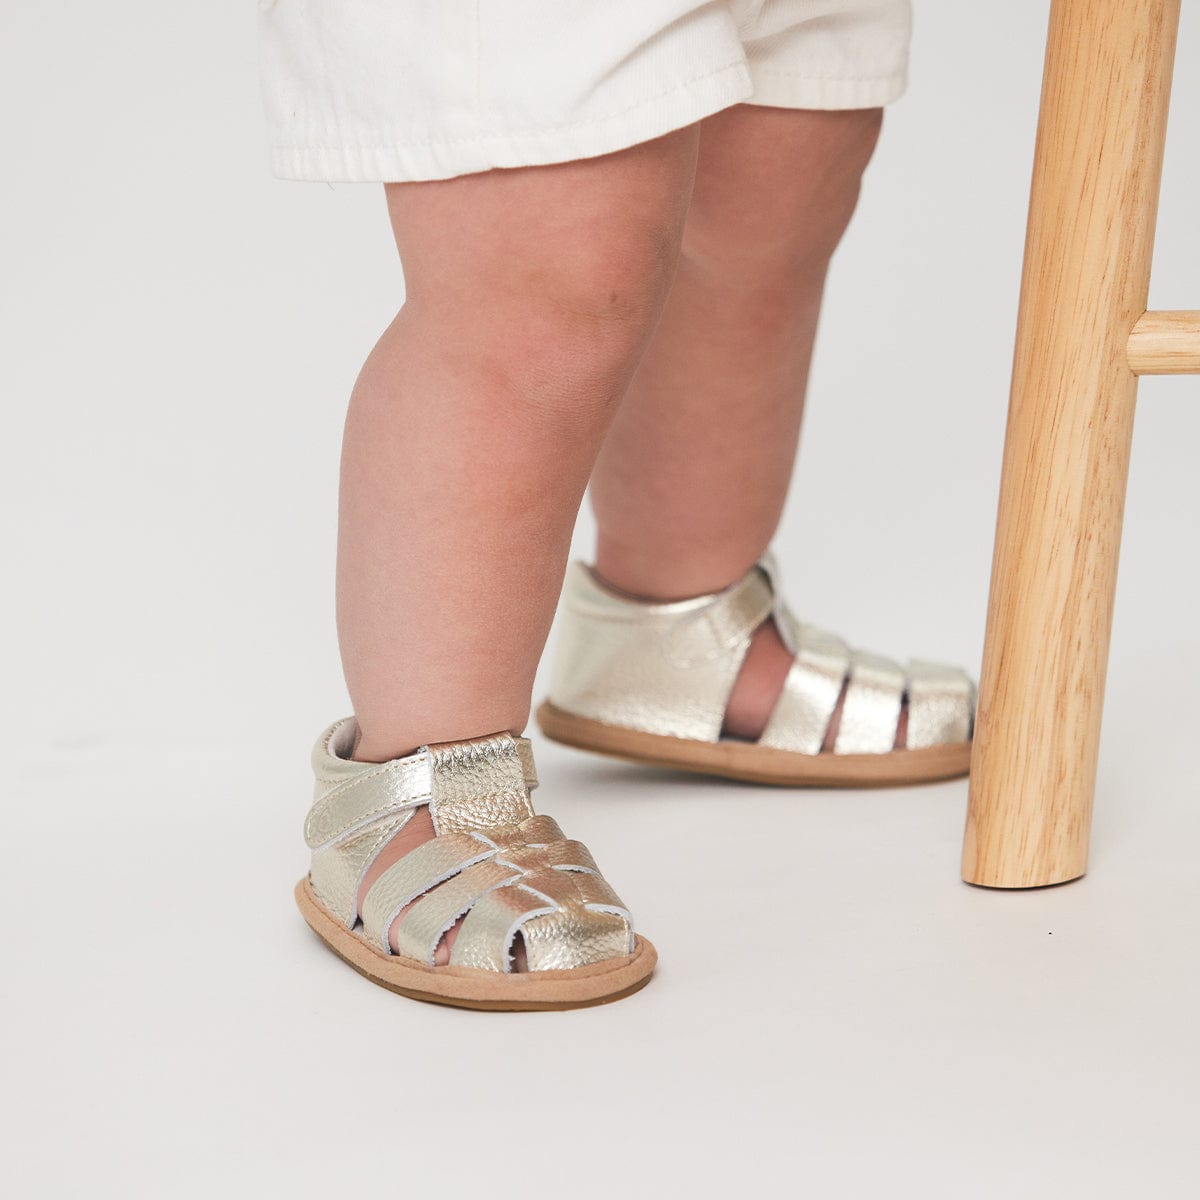 Pretty Brave Baby Shoes Rio Sandal in Gold